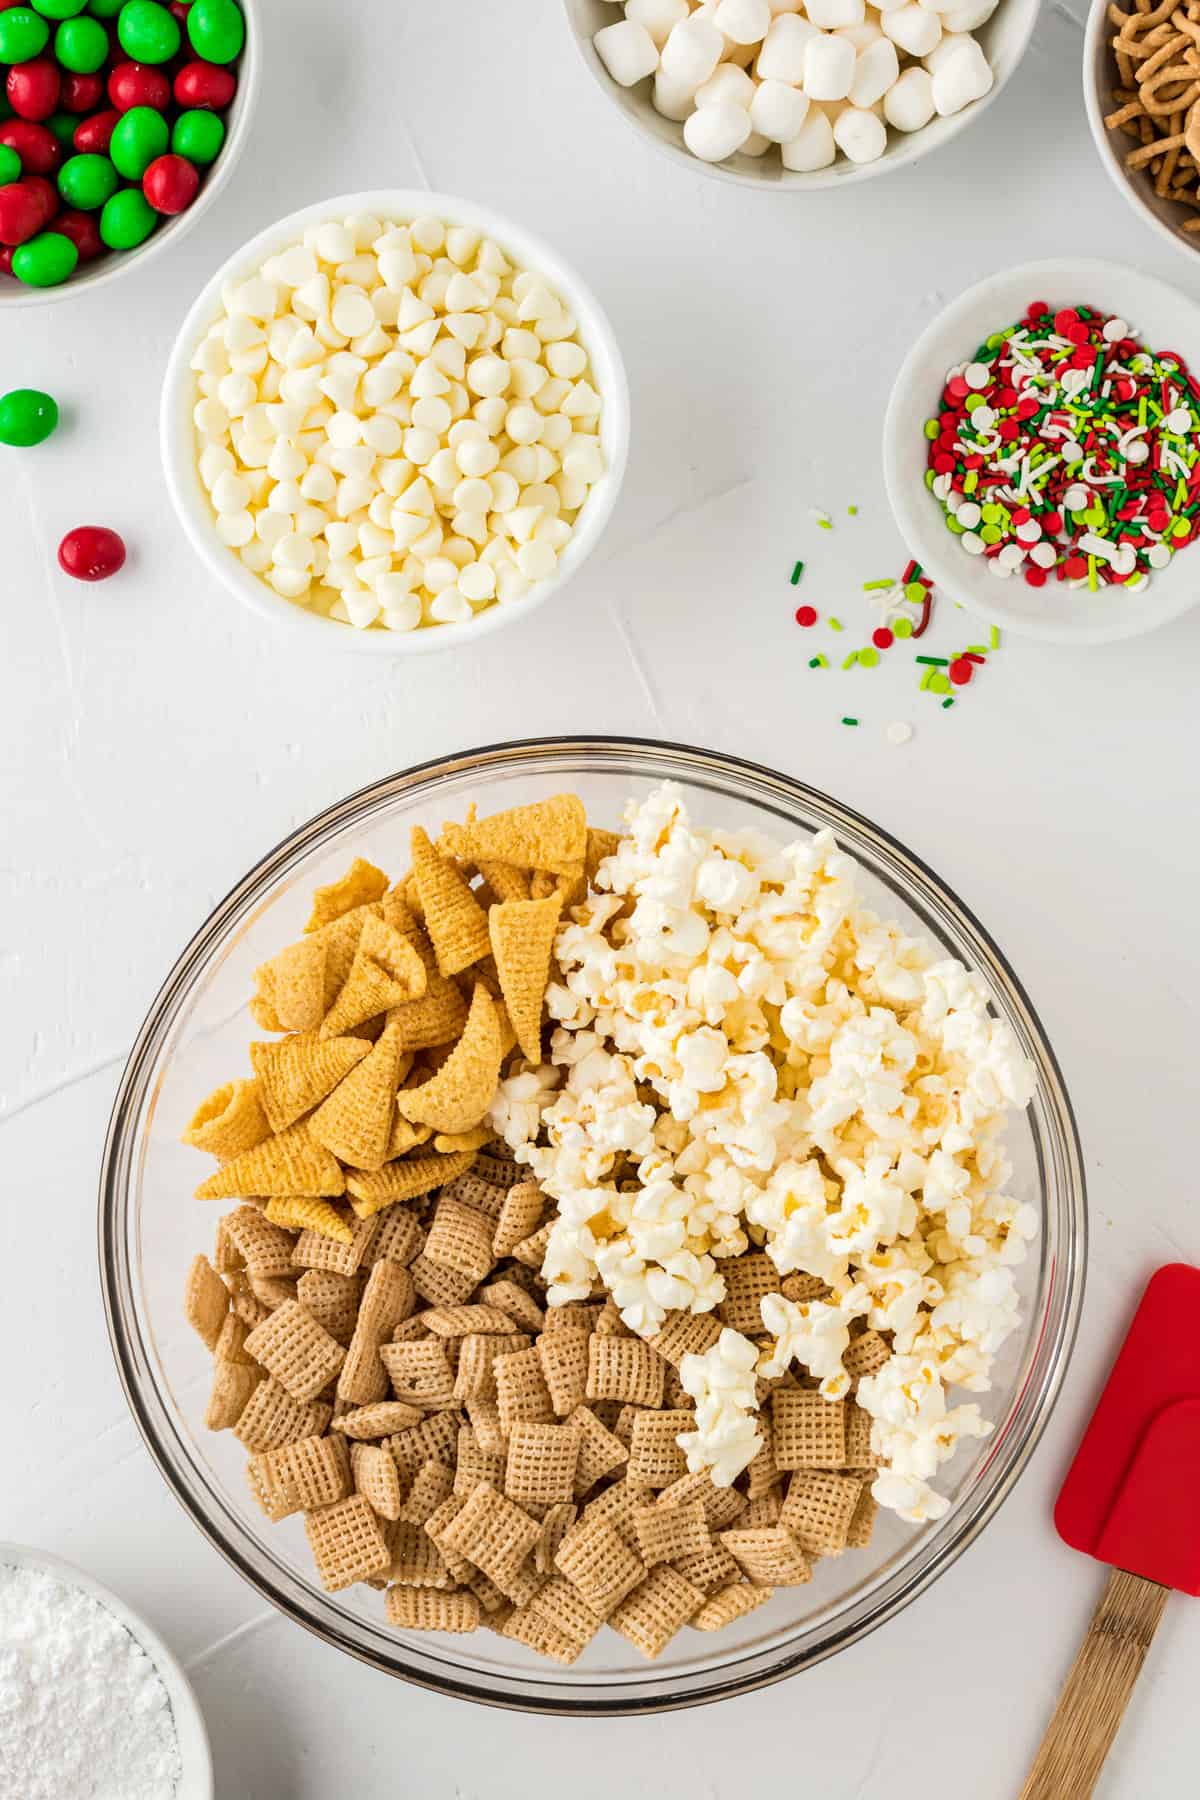 In a Large bowl mix together Popcorn, bugles & rice Chex and set aside.